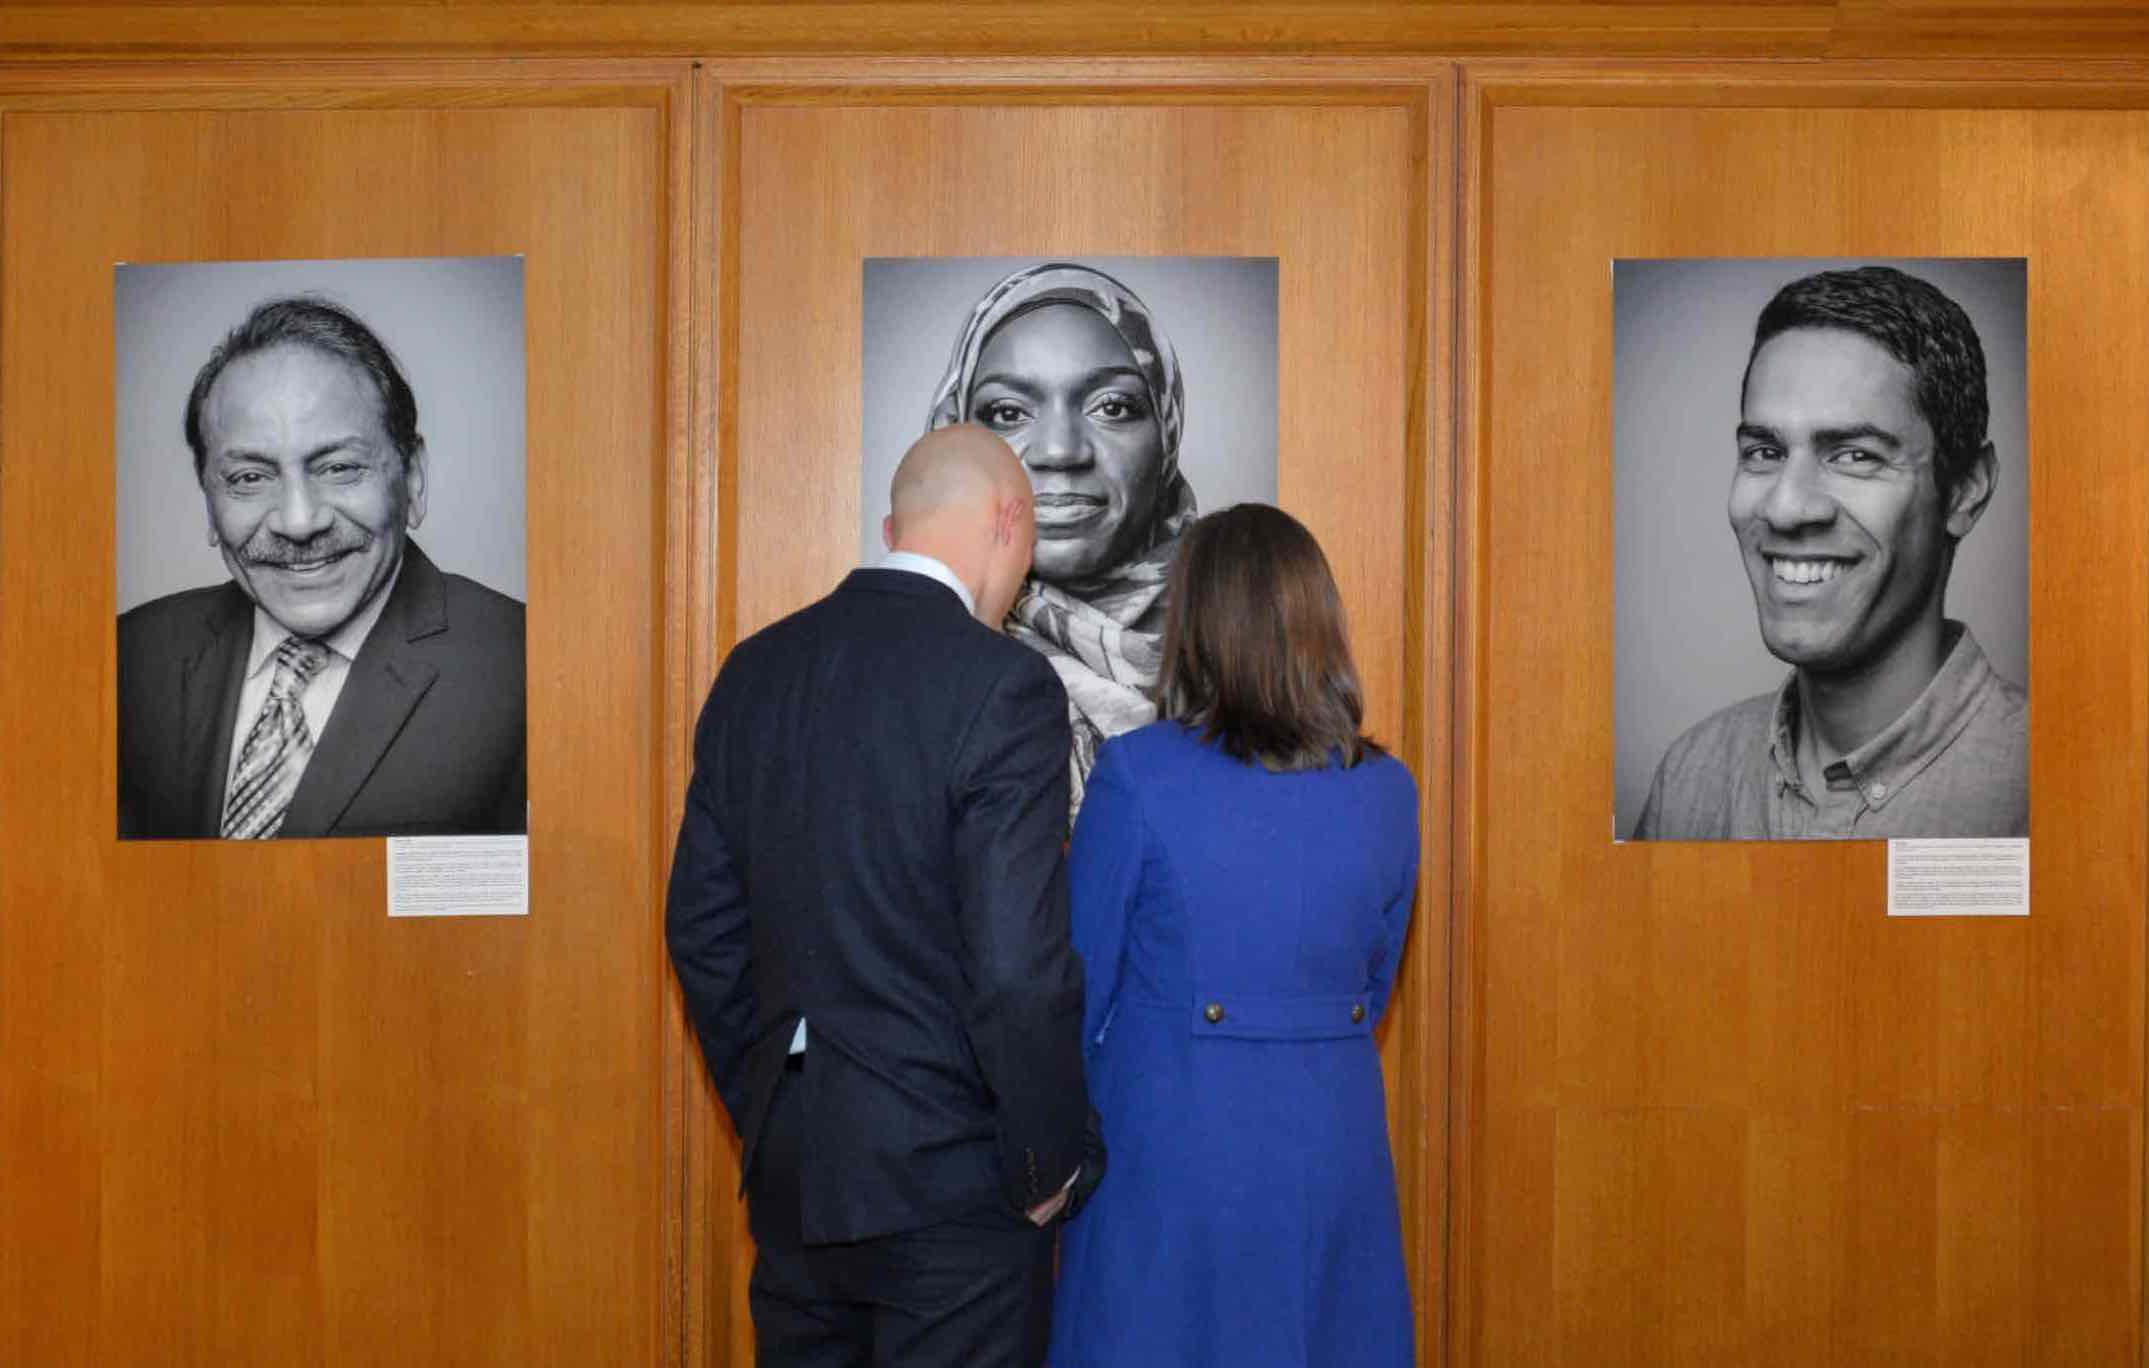 2 people looking at a photo narrative exhibit